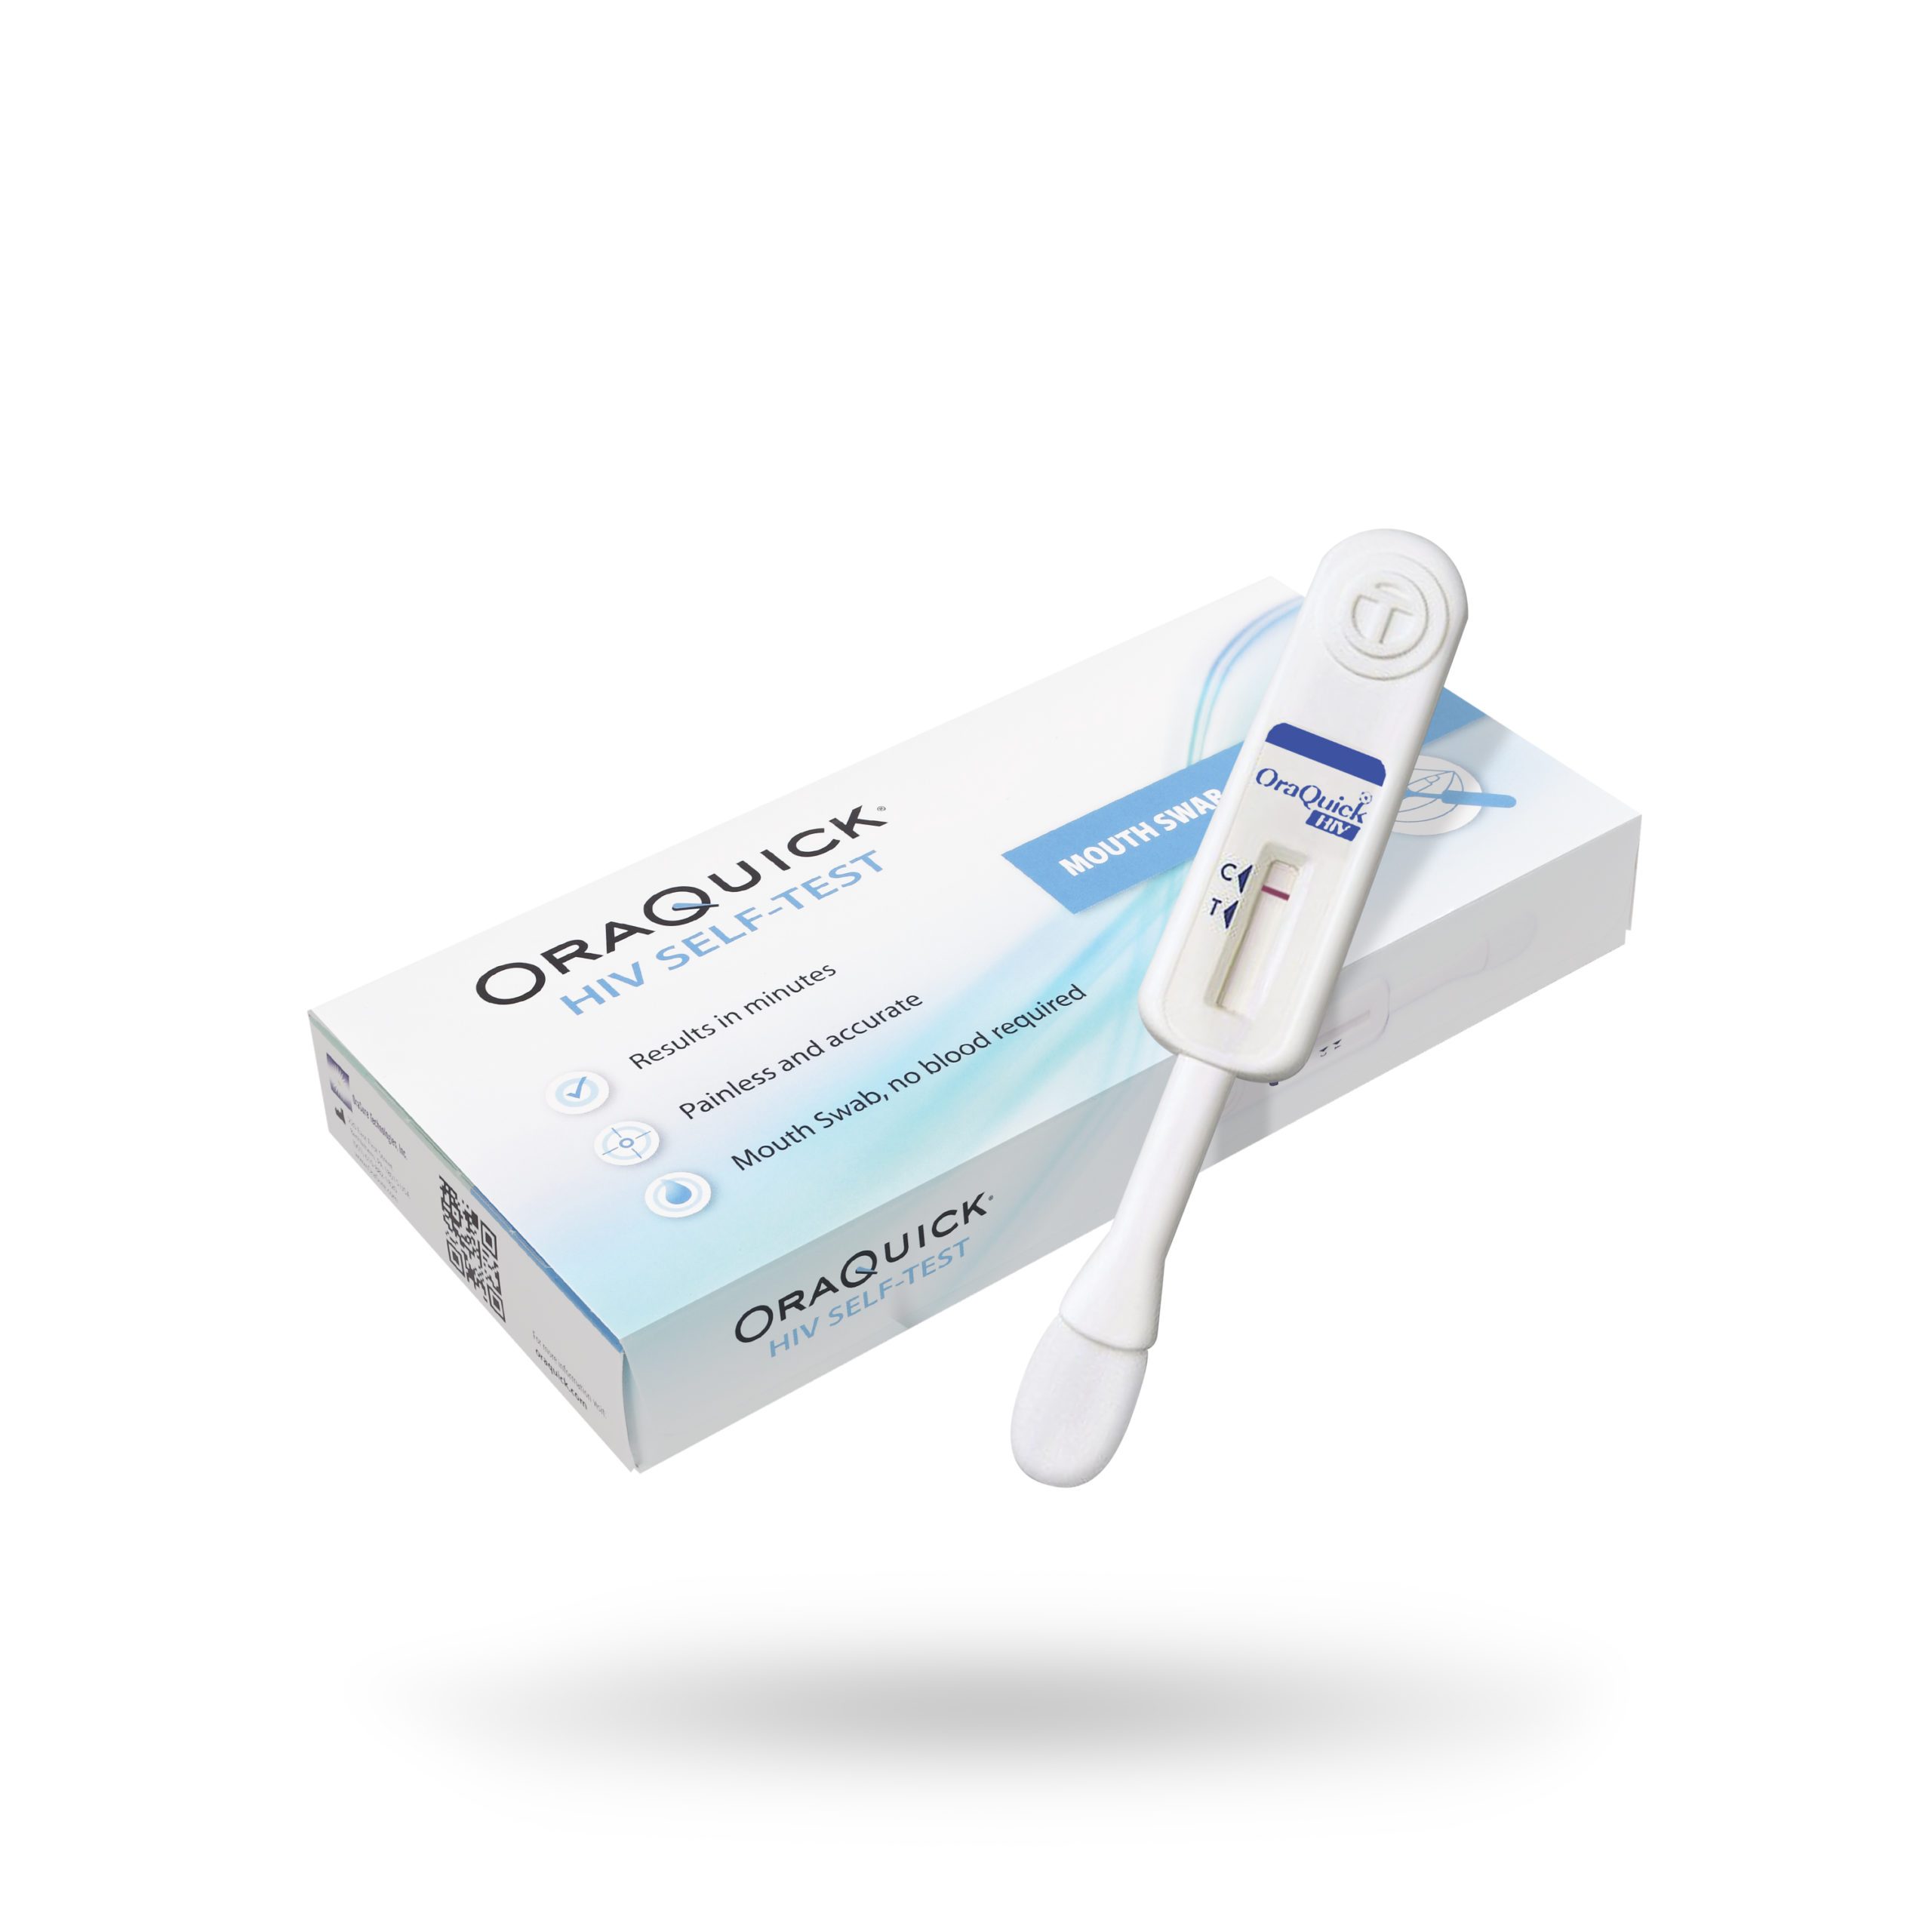 OraQuick HIV Self Test brought to you by BioSure